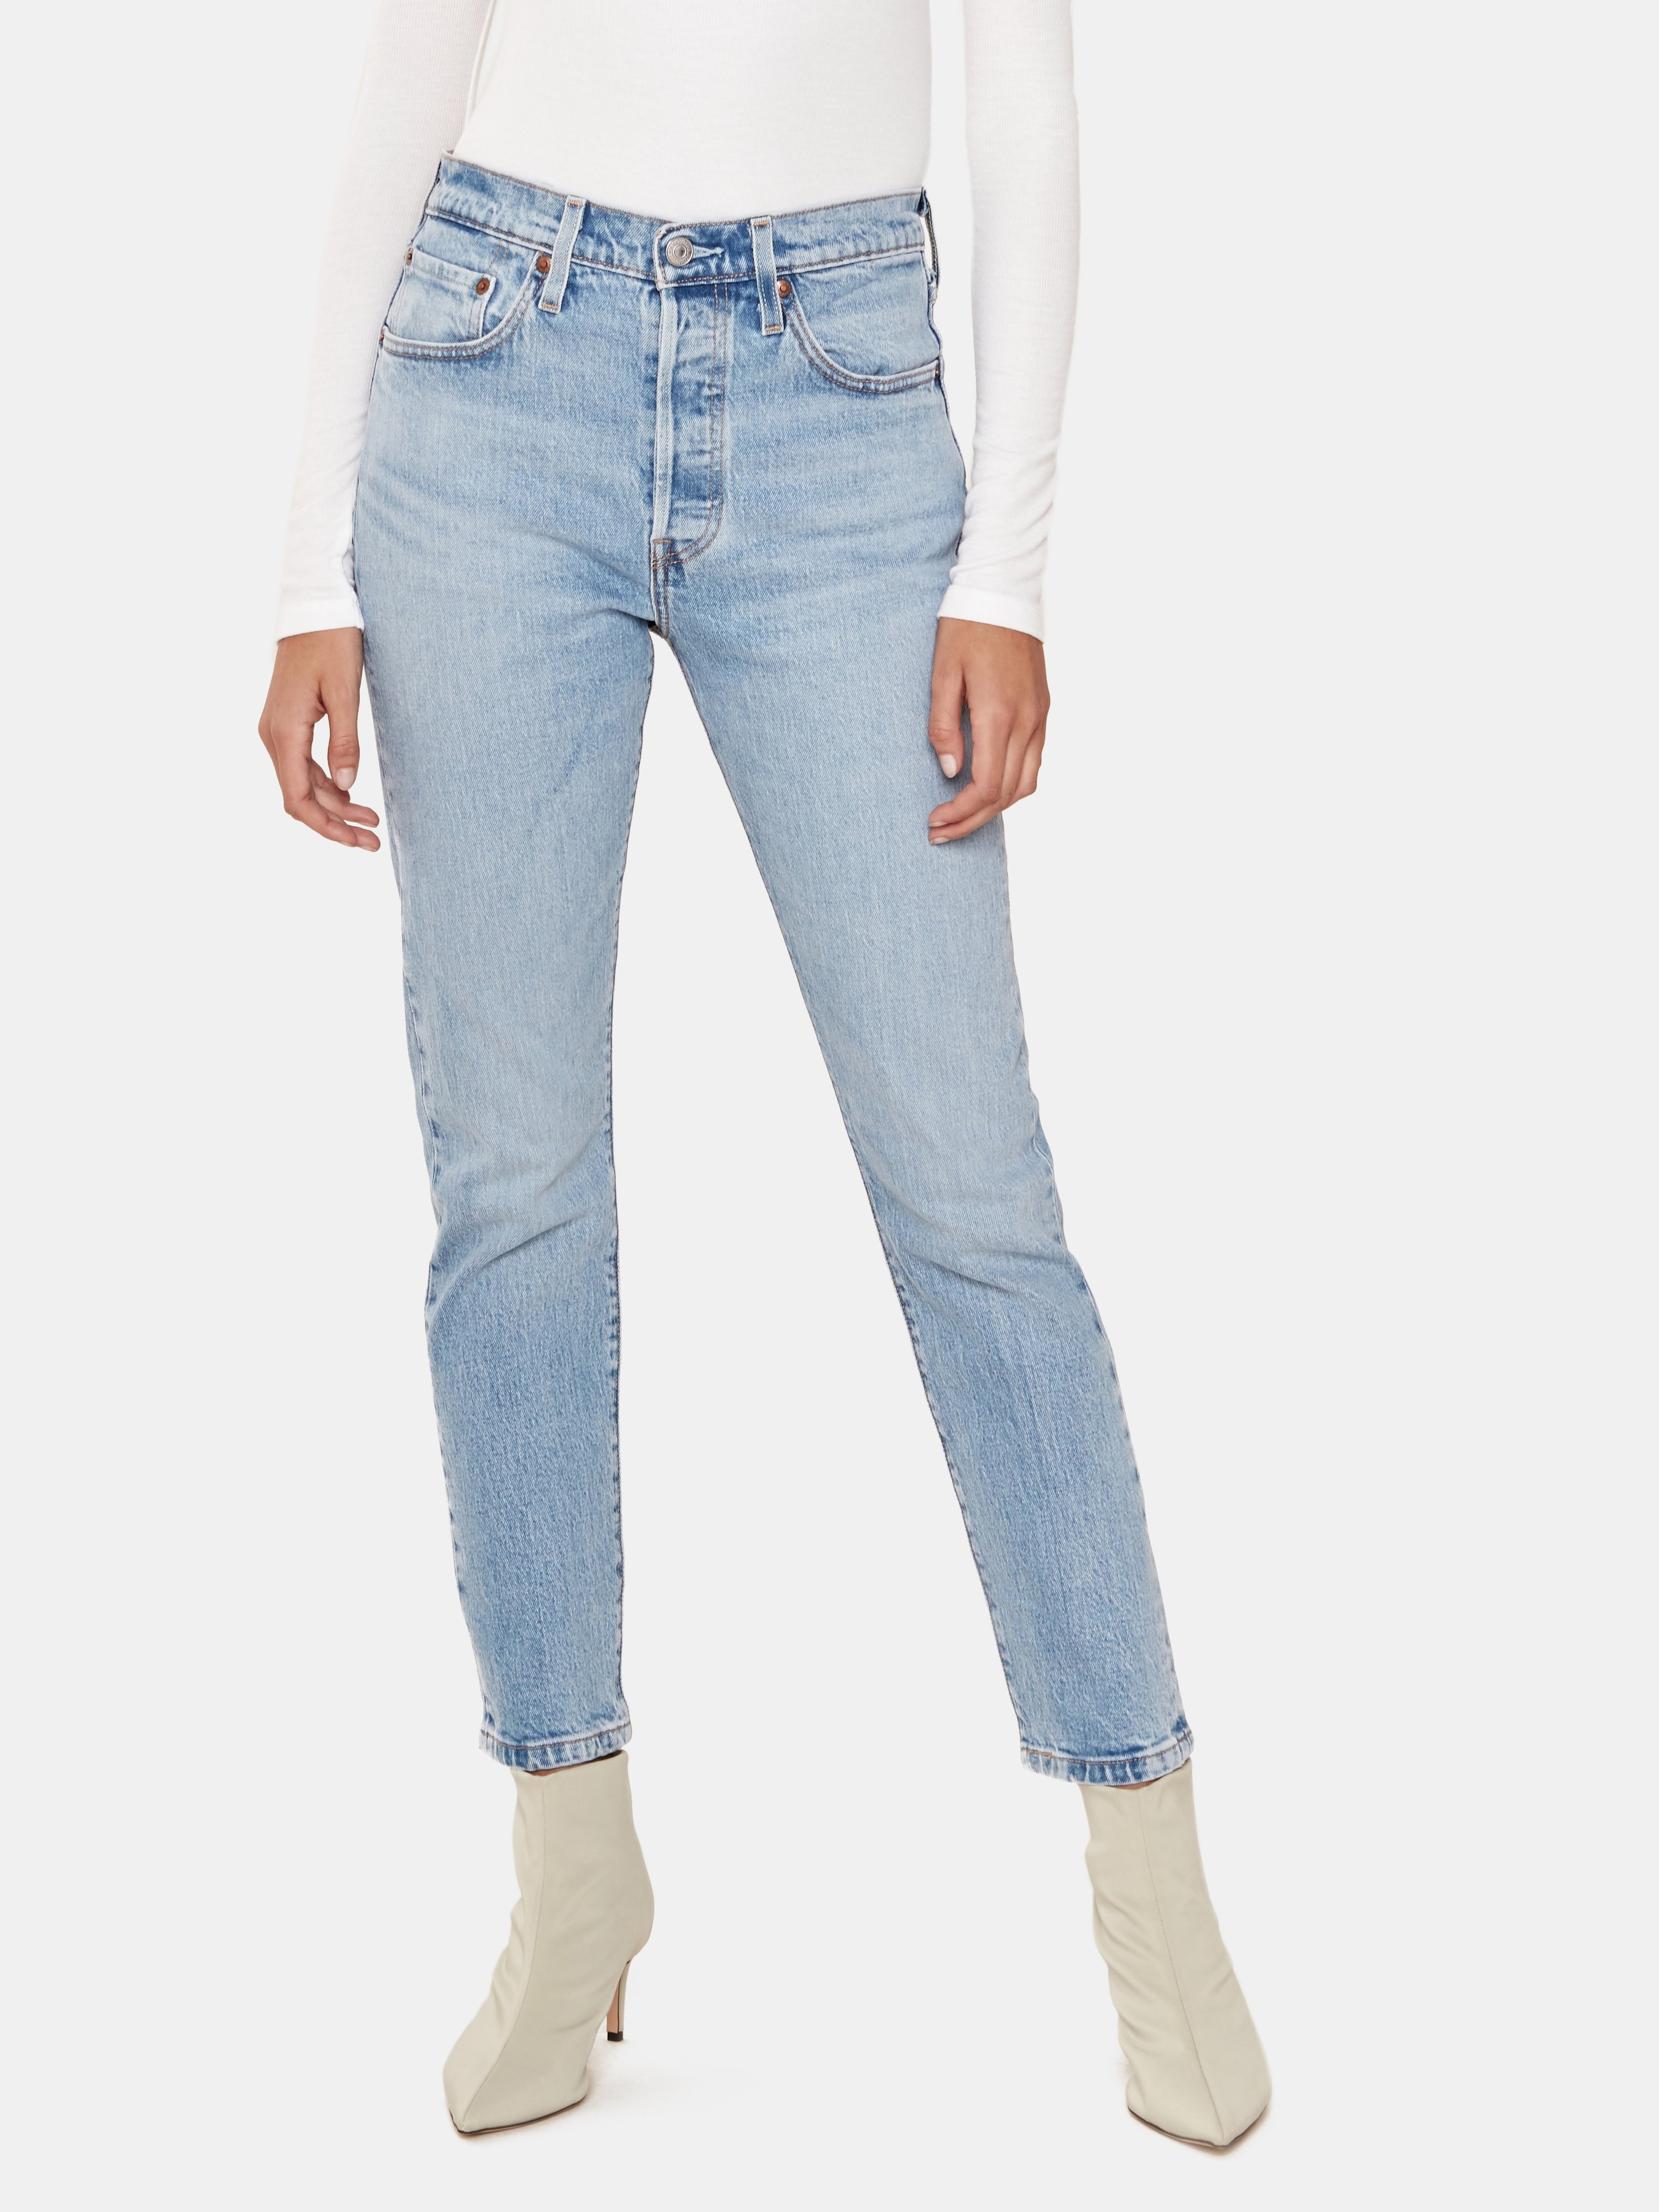 LEVI'S LEVI'S 501 HIGH RISE ANKLE CUT SKINNY JEANS